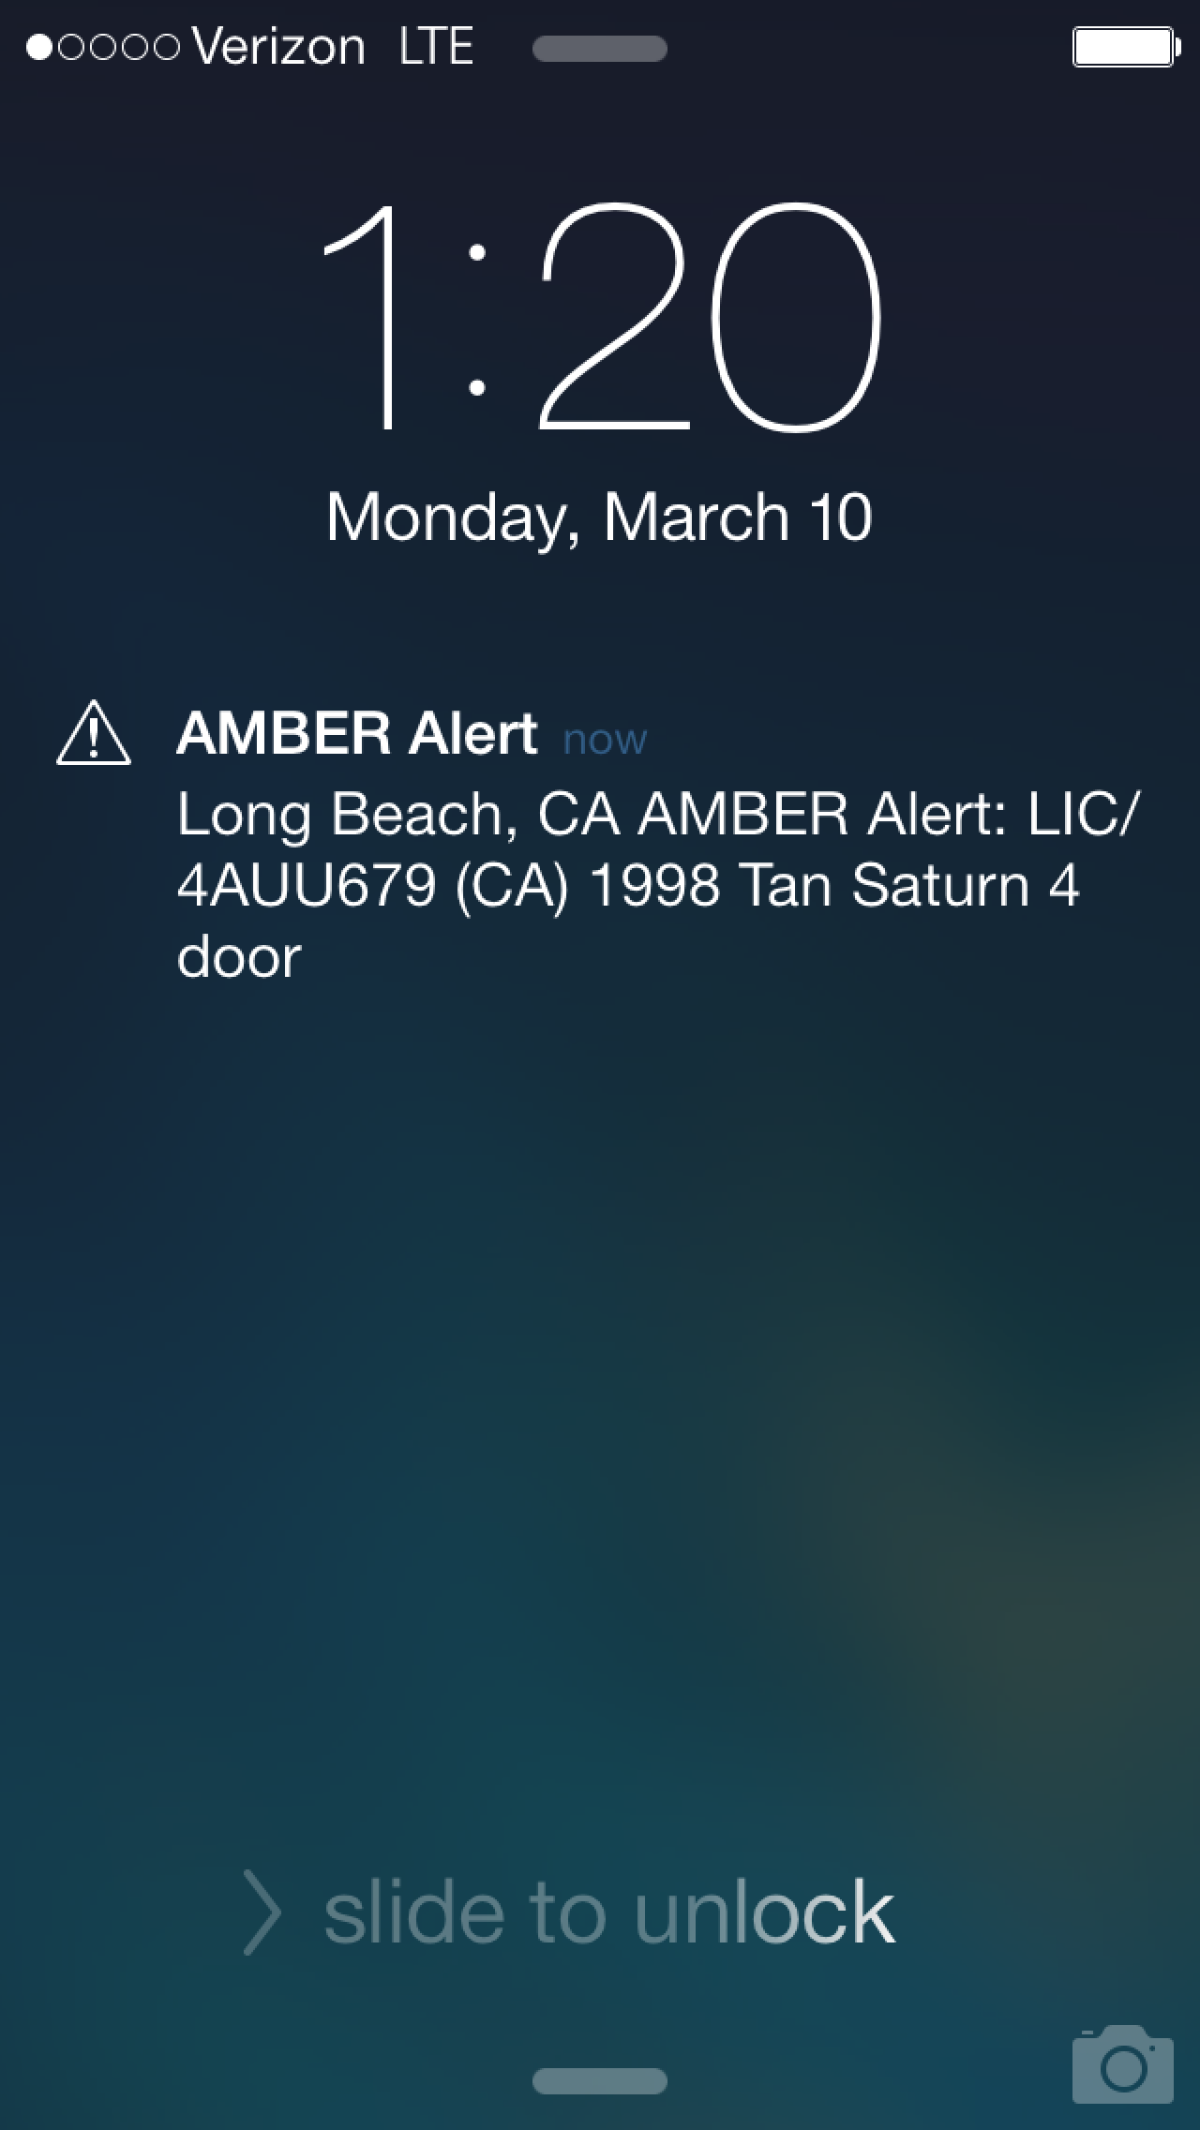 An Amber Alert was issued Monday for a 12-year-old Long Beach boy.